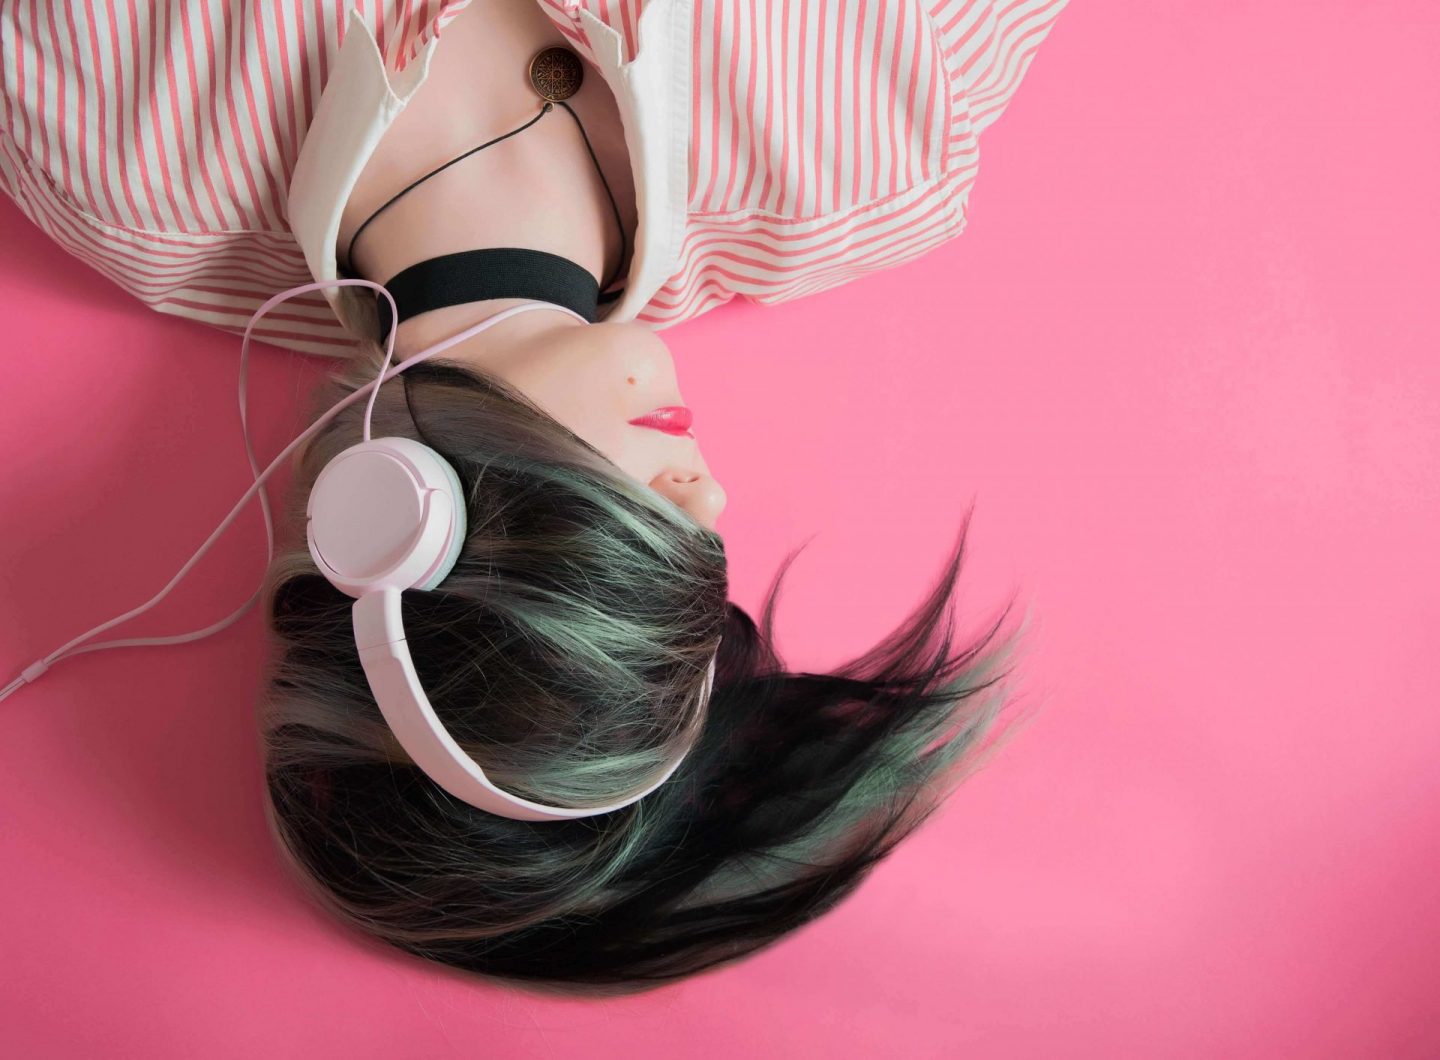 Programmatic Media Buying 101: Why You Should Add Programmatic Audio To Your Media Plan